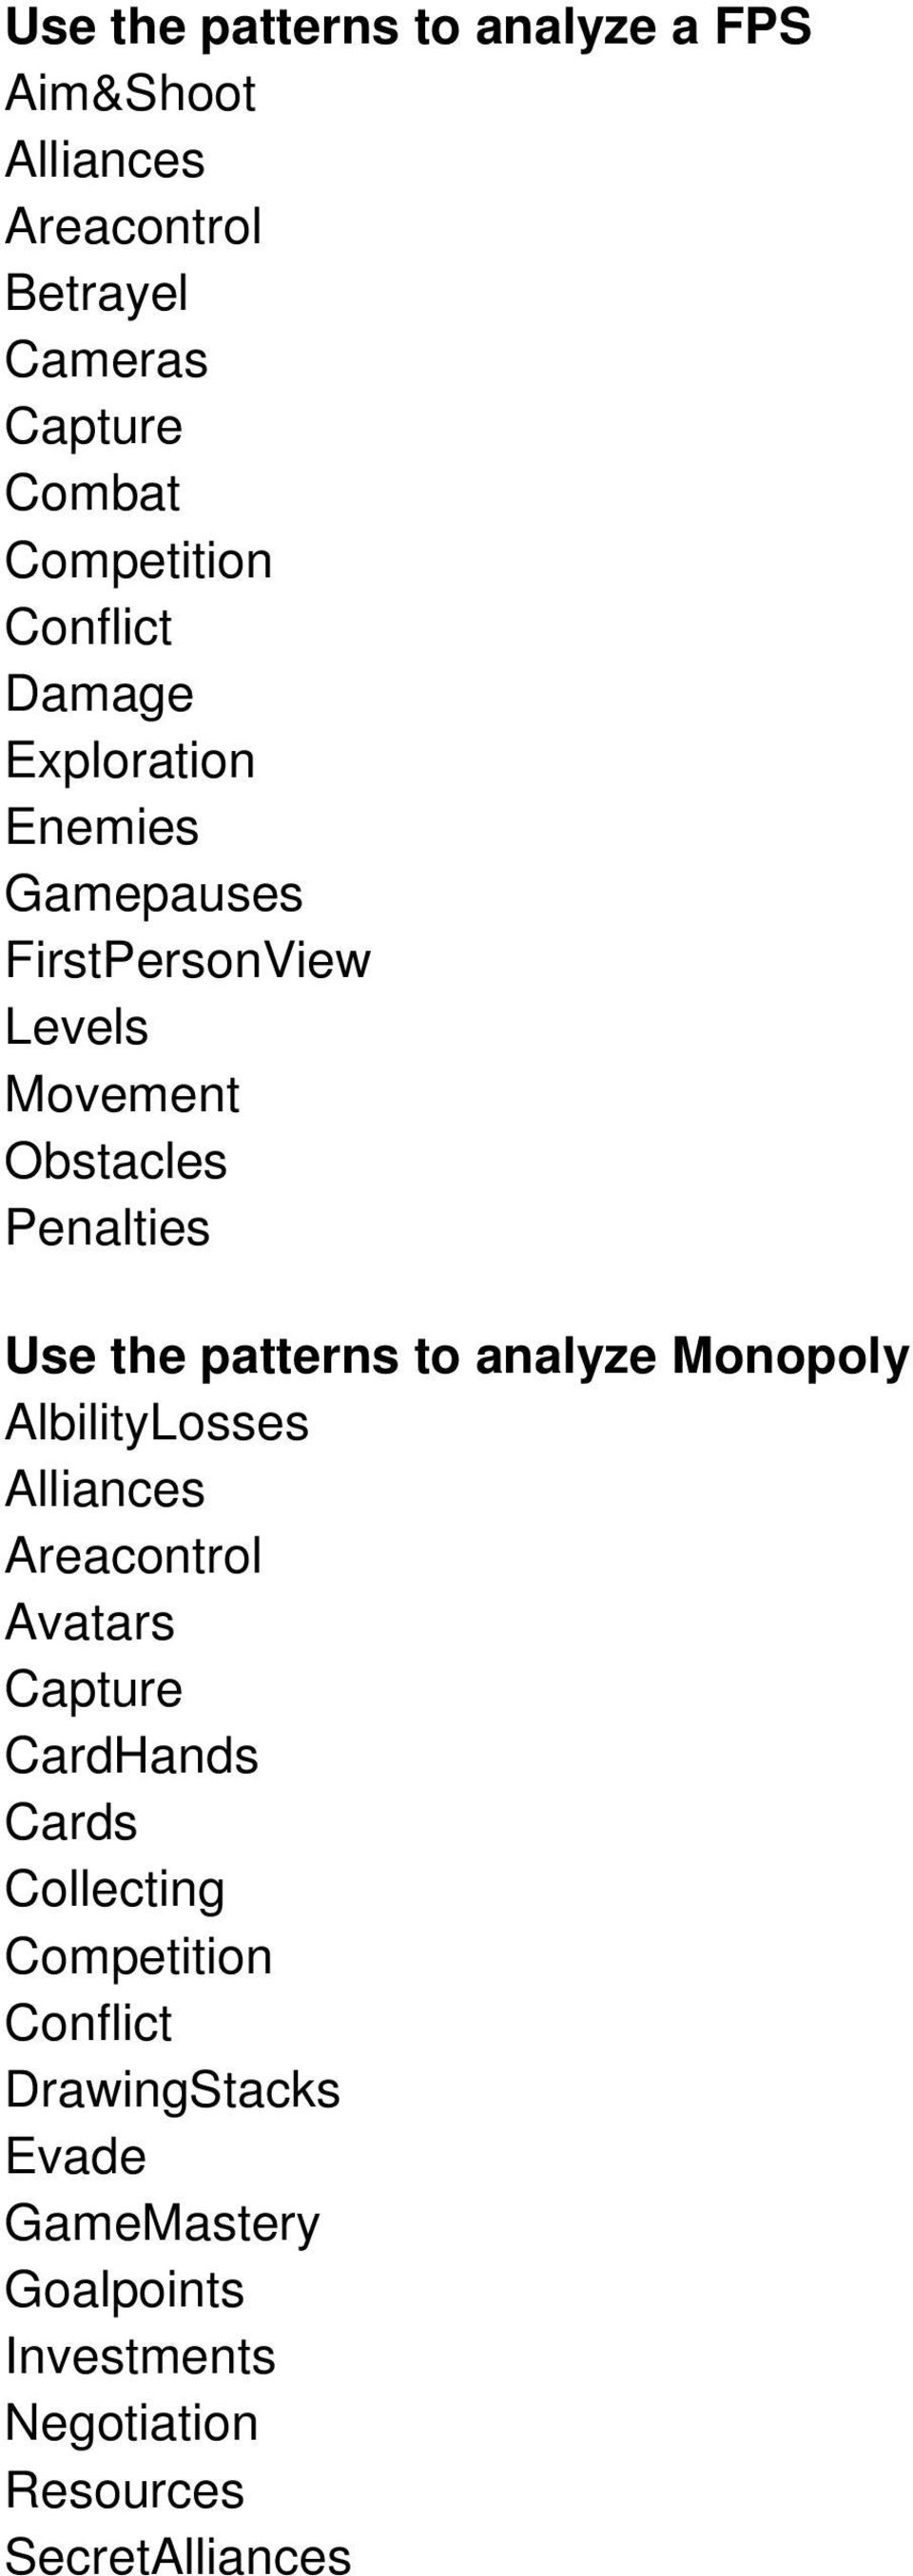 patterns to analyze Monopoly AlbilityLosses Alliances Areacontrol Avatars Capture CardHands Cards Collecting